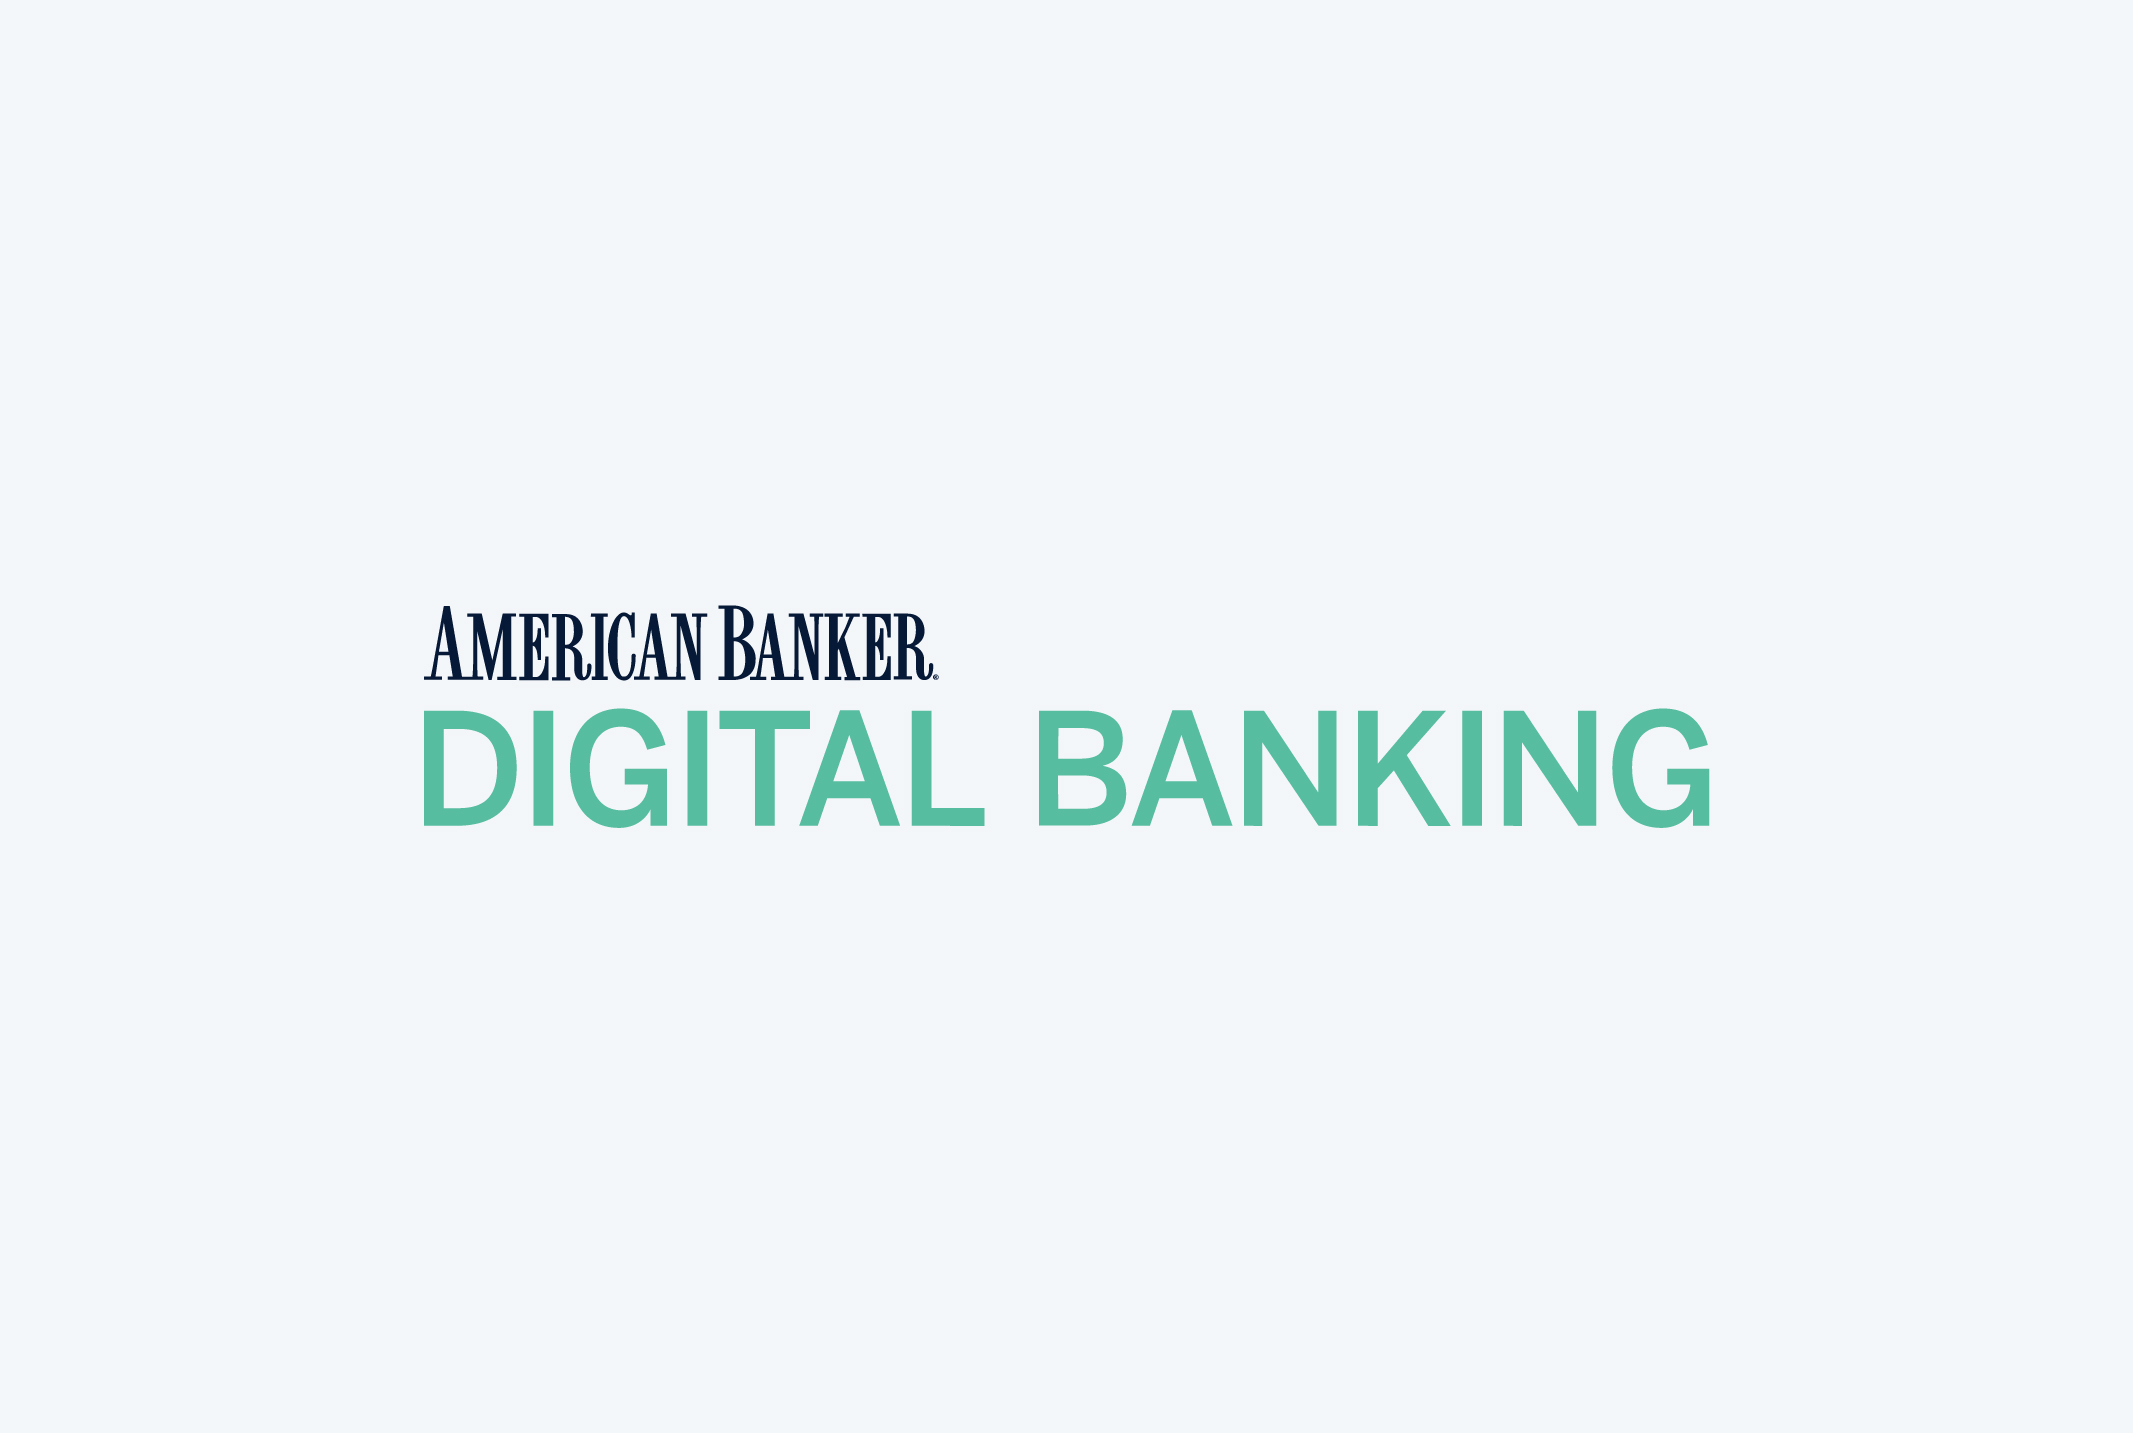 American Banker Digital Banking leading the way to disruption